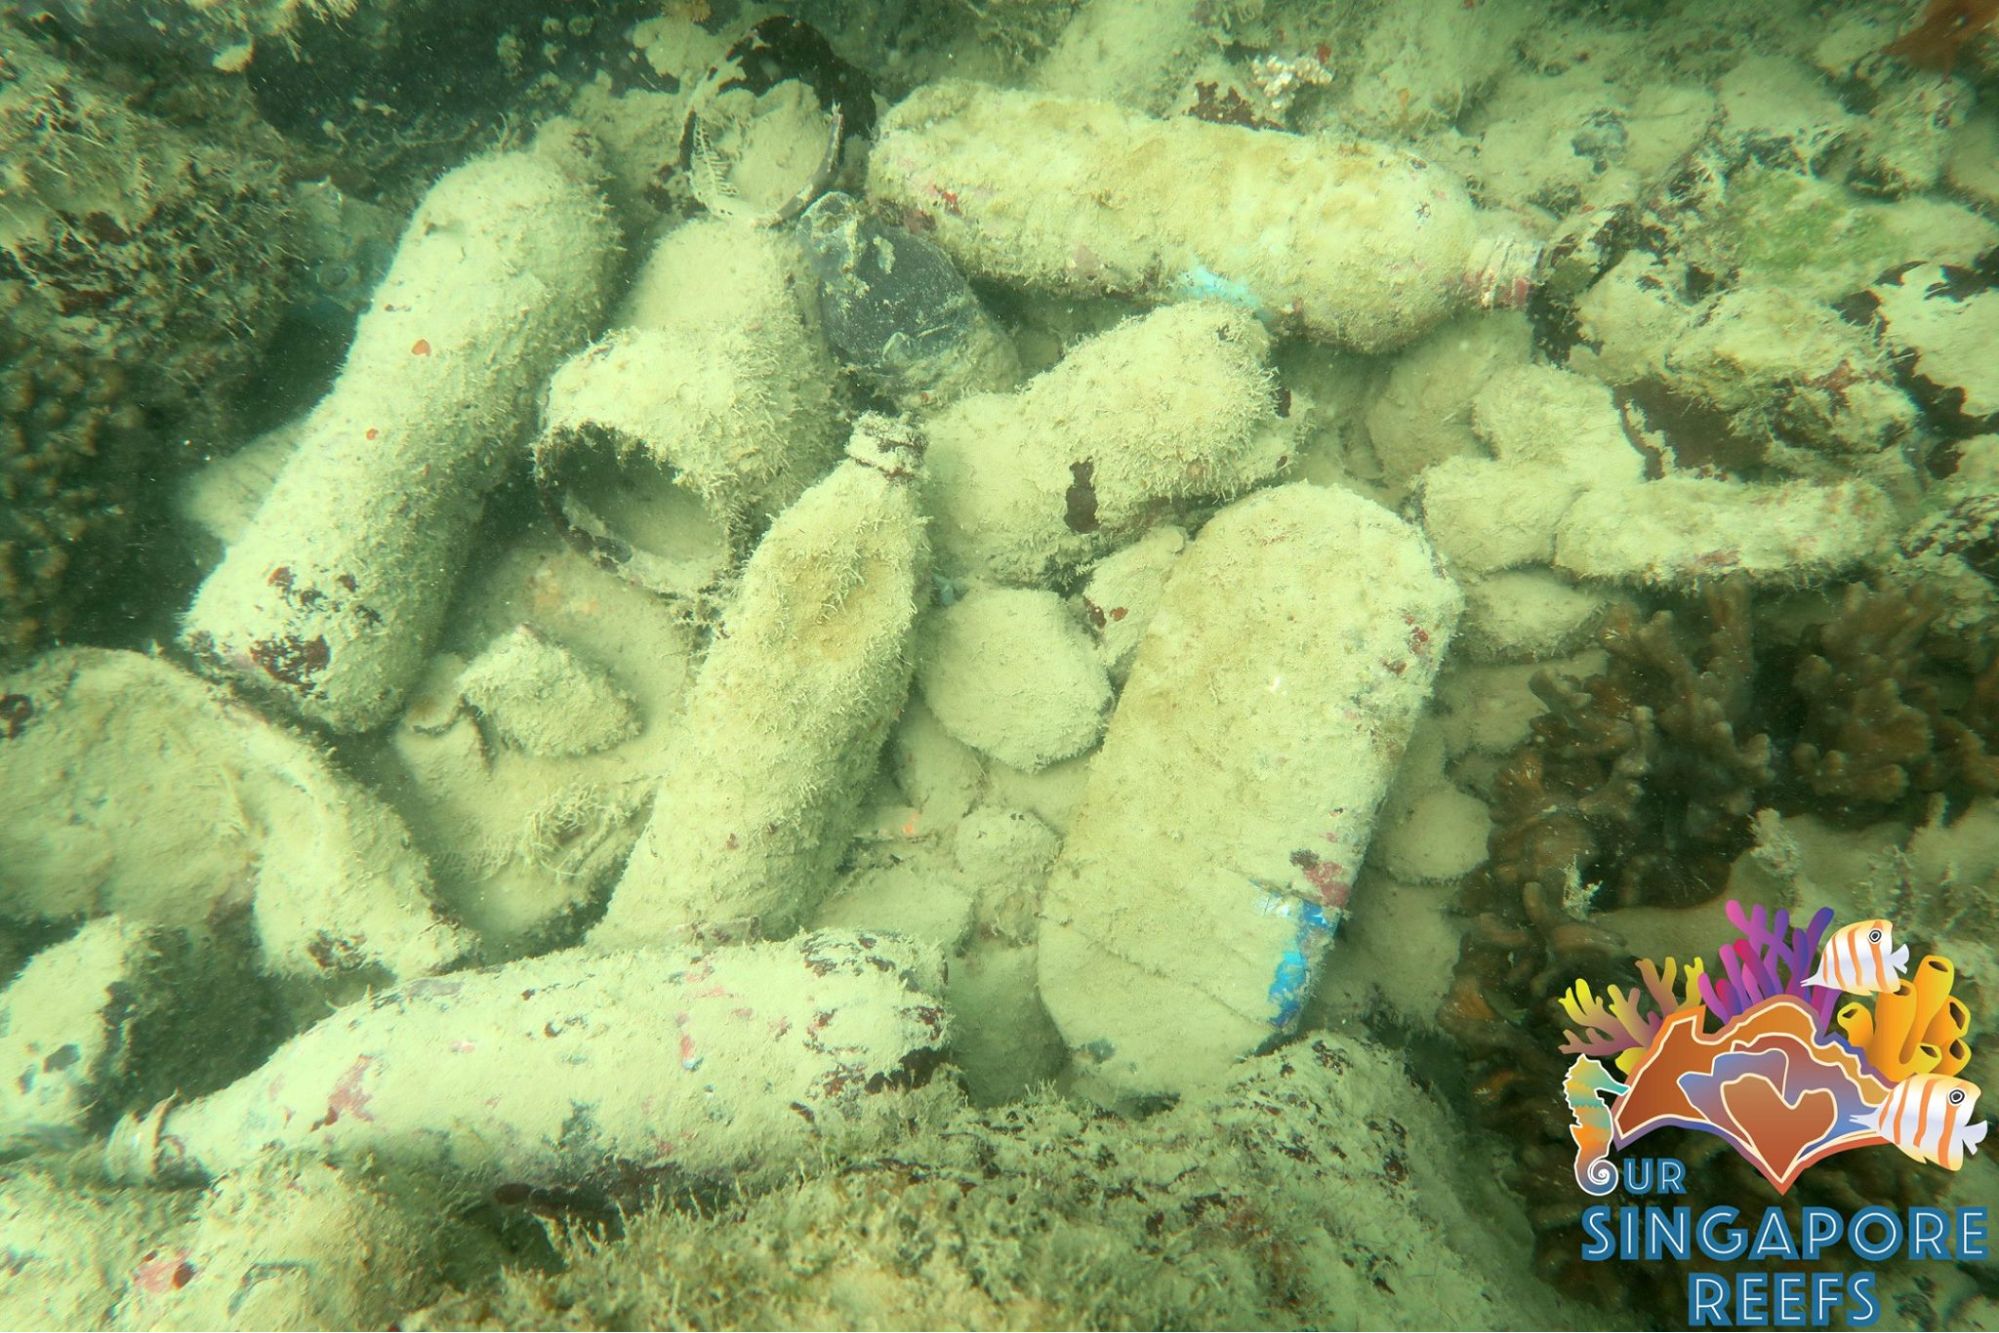 Cleanup groups to join in Singapore Our Singapore Reefs